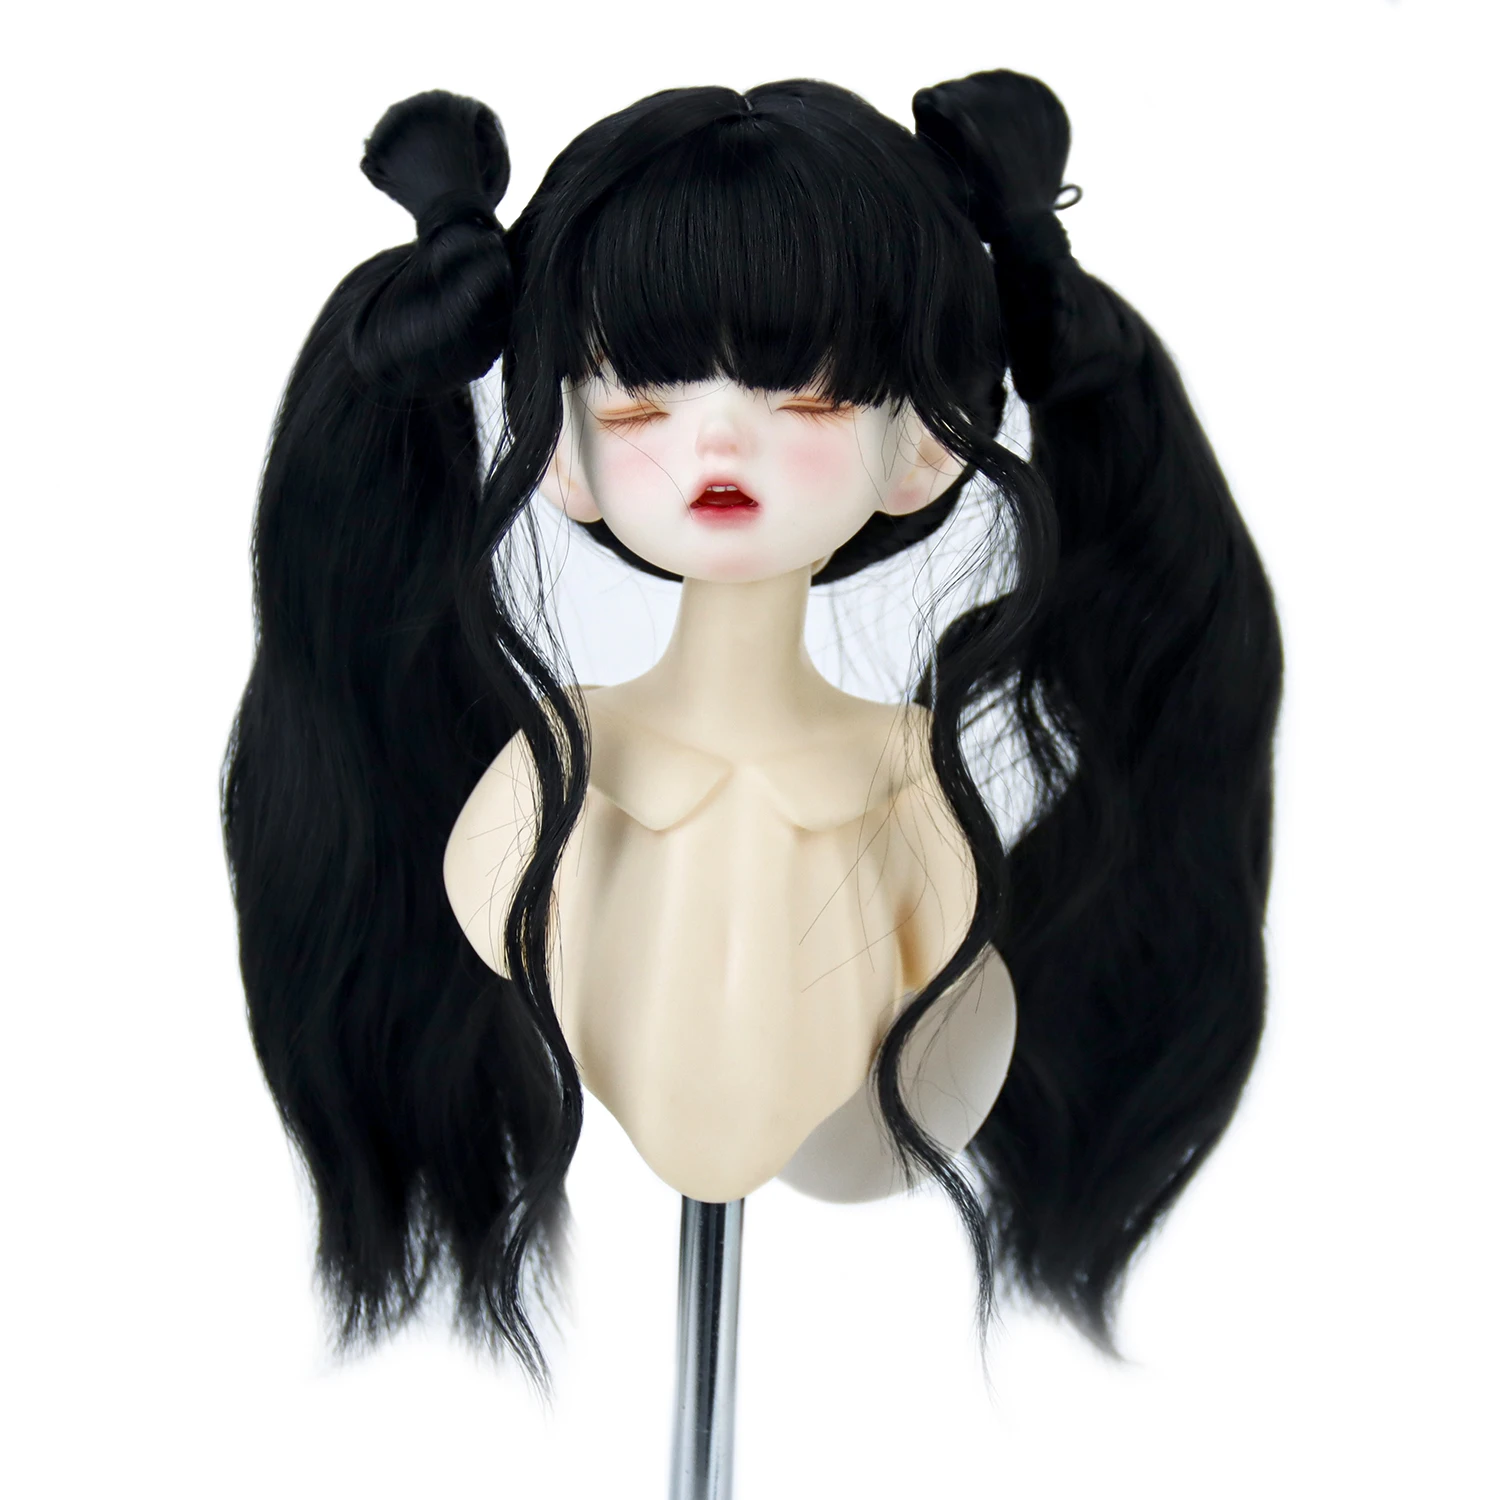 1/6 BJD Wigs Pigtails Black Braid With Bangs Wavy 6-7'' MSD Doll Accessories Heat Resistant Fiber Tress Doll Hair DIY Gifts doll wig bangs 5 100cm tress curly hair extensions for bjd blyth american all dolls accesories